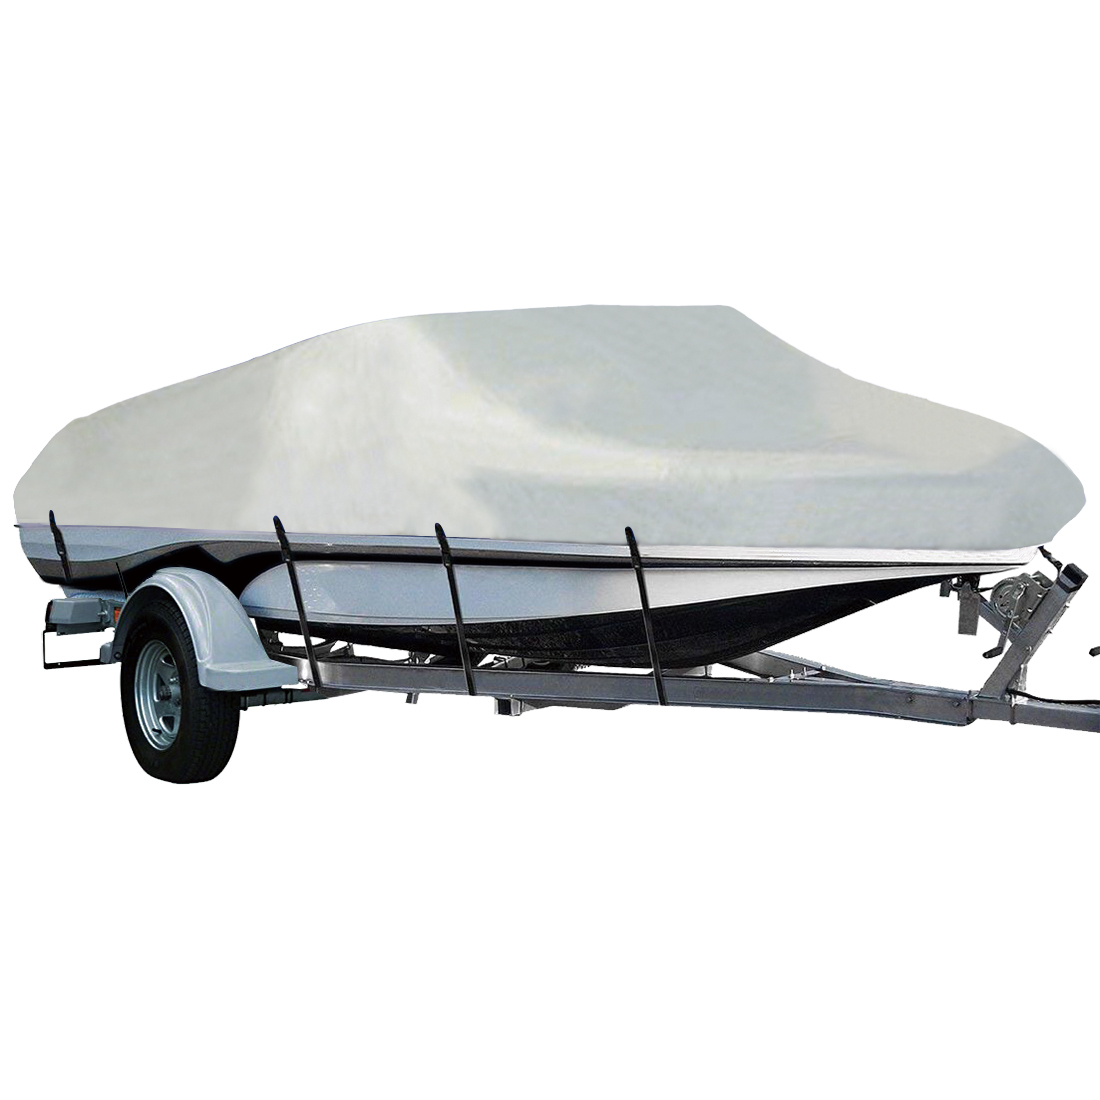 LEADALLWAY Heavy Duty 210D Polyester Cover Marine Grade Trailerable Boat Cover Gray Fits V-Hull Tri-Hull Runabouts and Bass Boats 